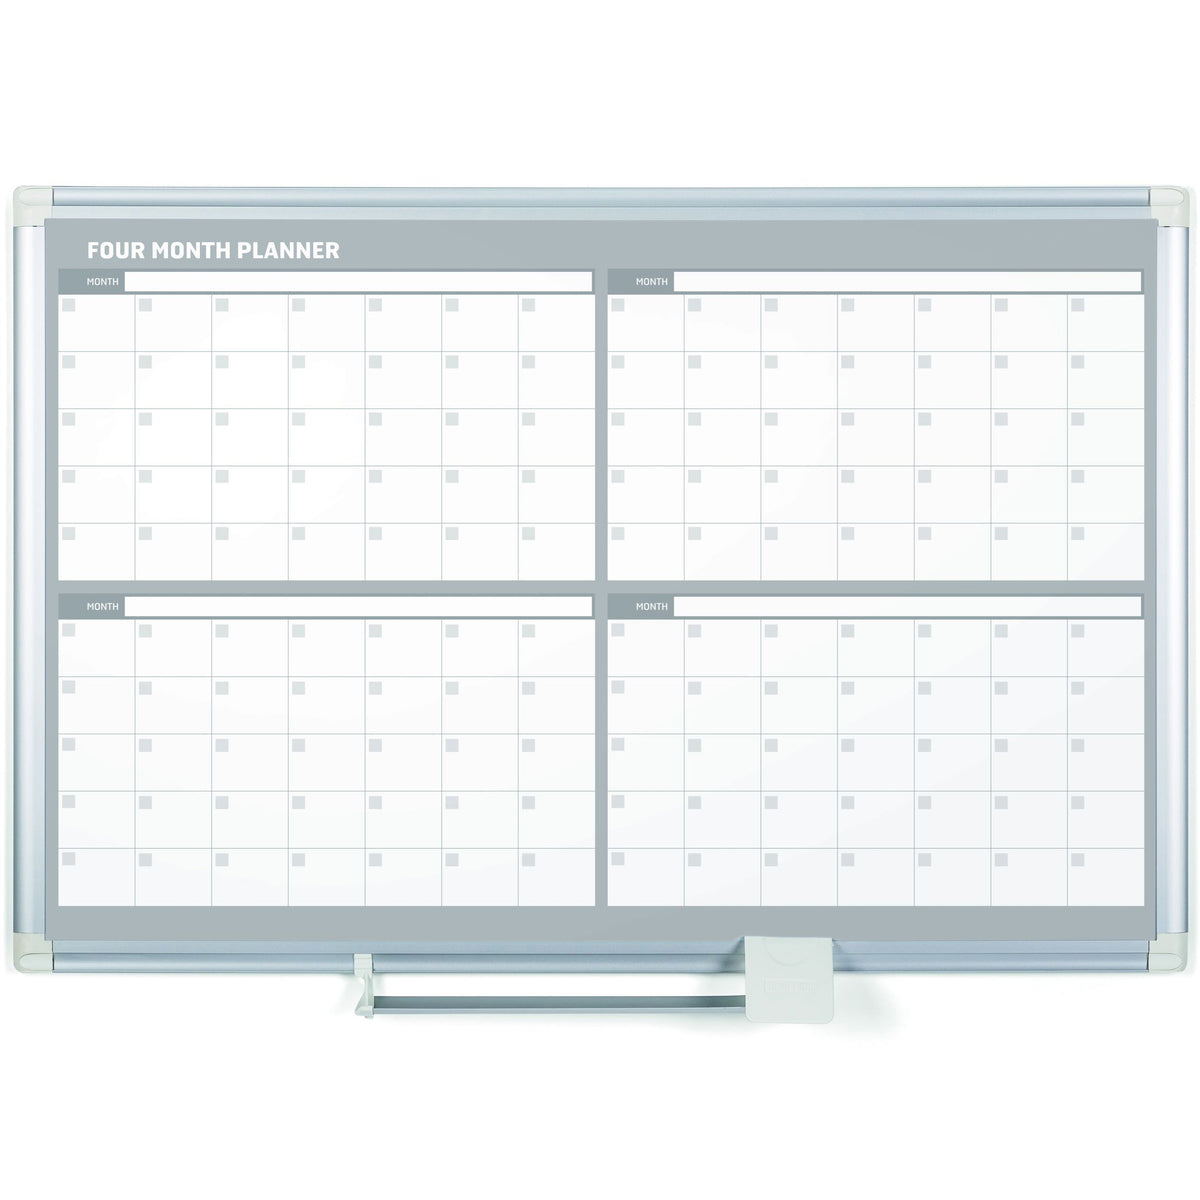 GA03105830 Magnetic Dry Erase 4 Month White Board Planner, Wall Mounting, Sliding Marker Tray, 24" x 36", Aluminum Frame by MasterVision